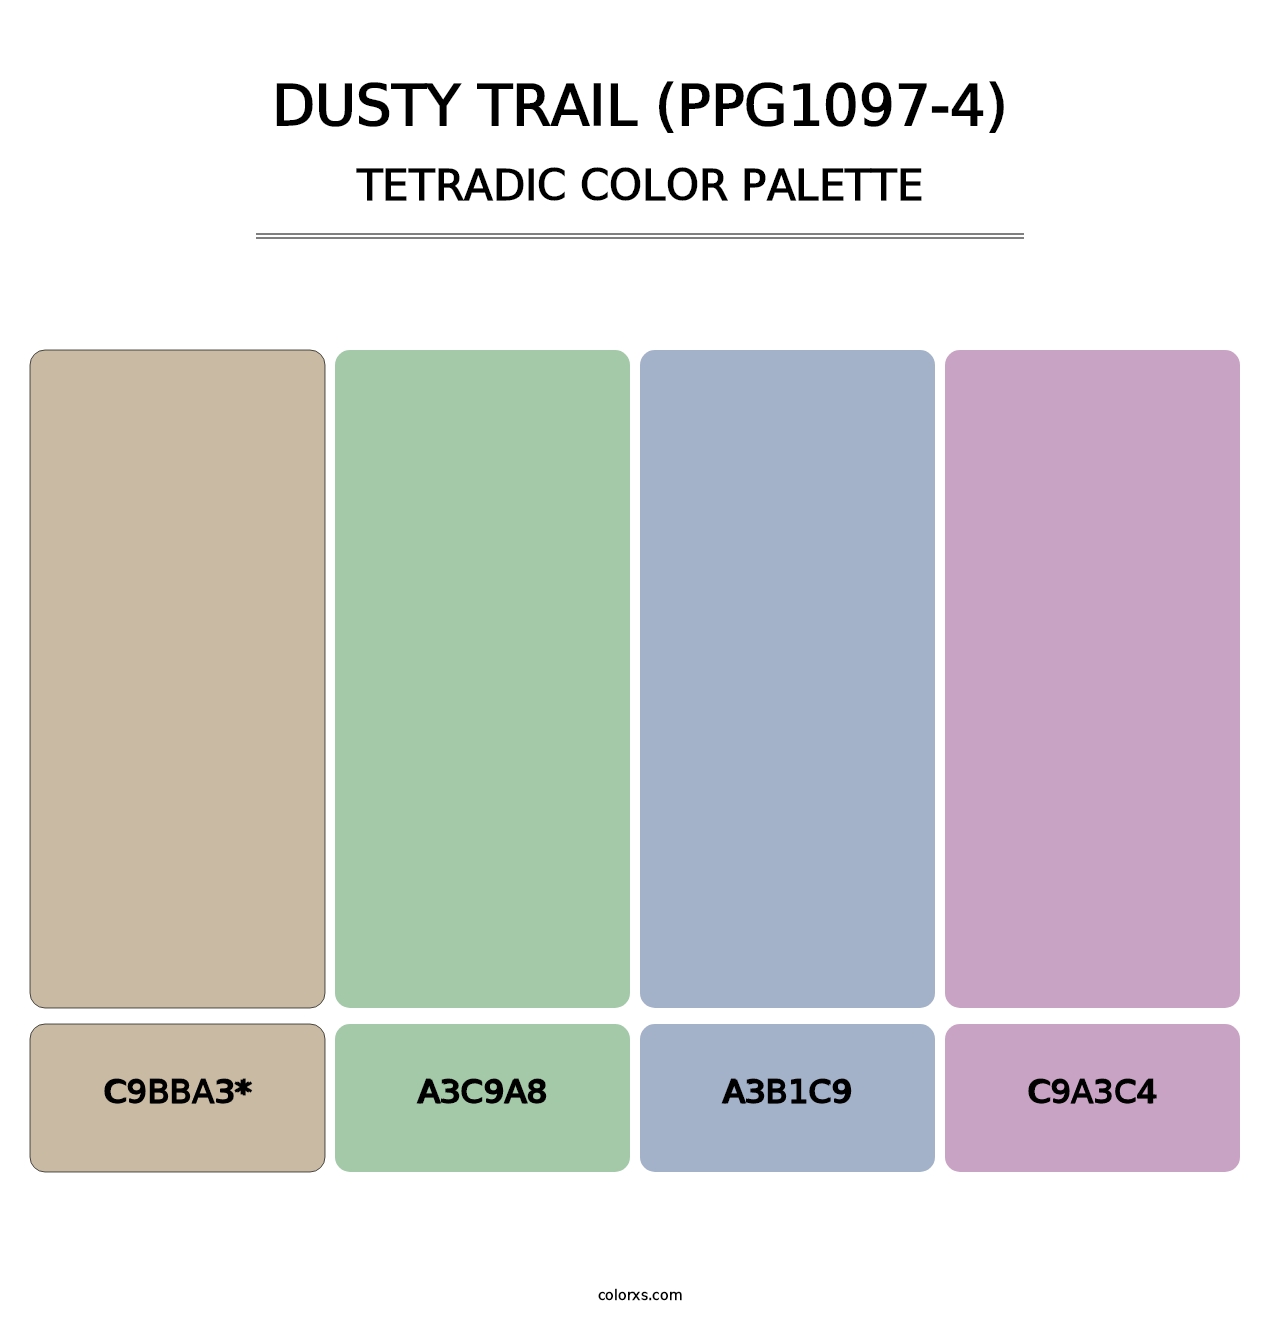 Dusty Trail (PPG1097-4) - Tetradic Color Palette